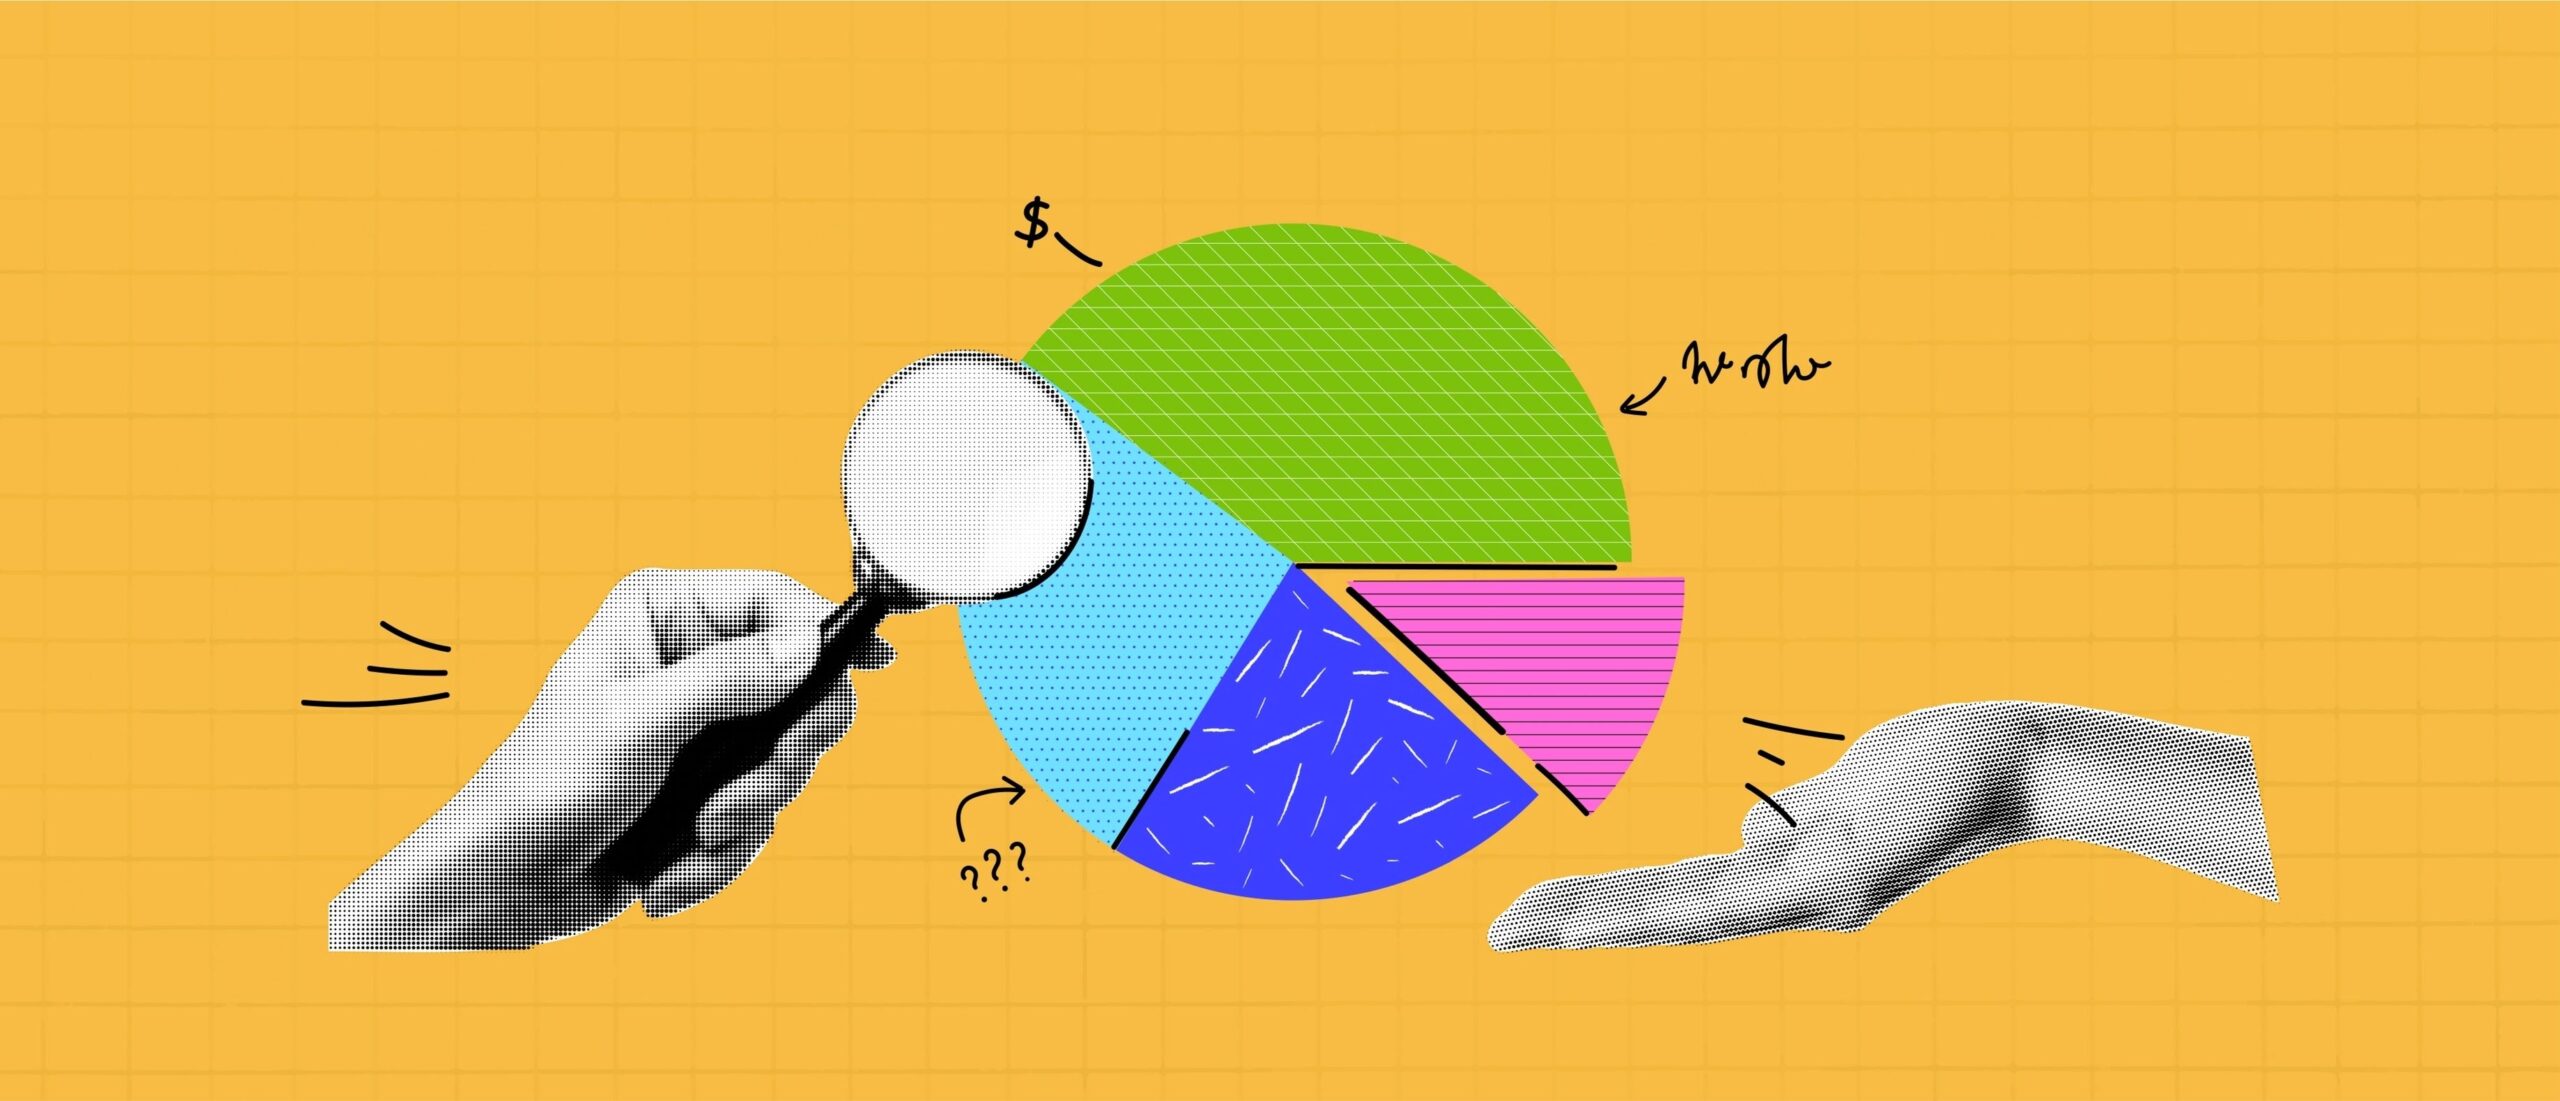 Colourful pie chart with hand holding magnifying glass